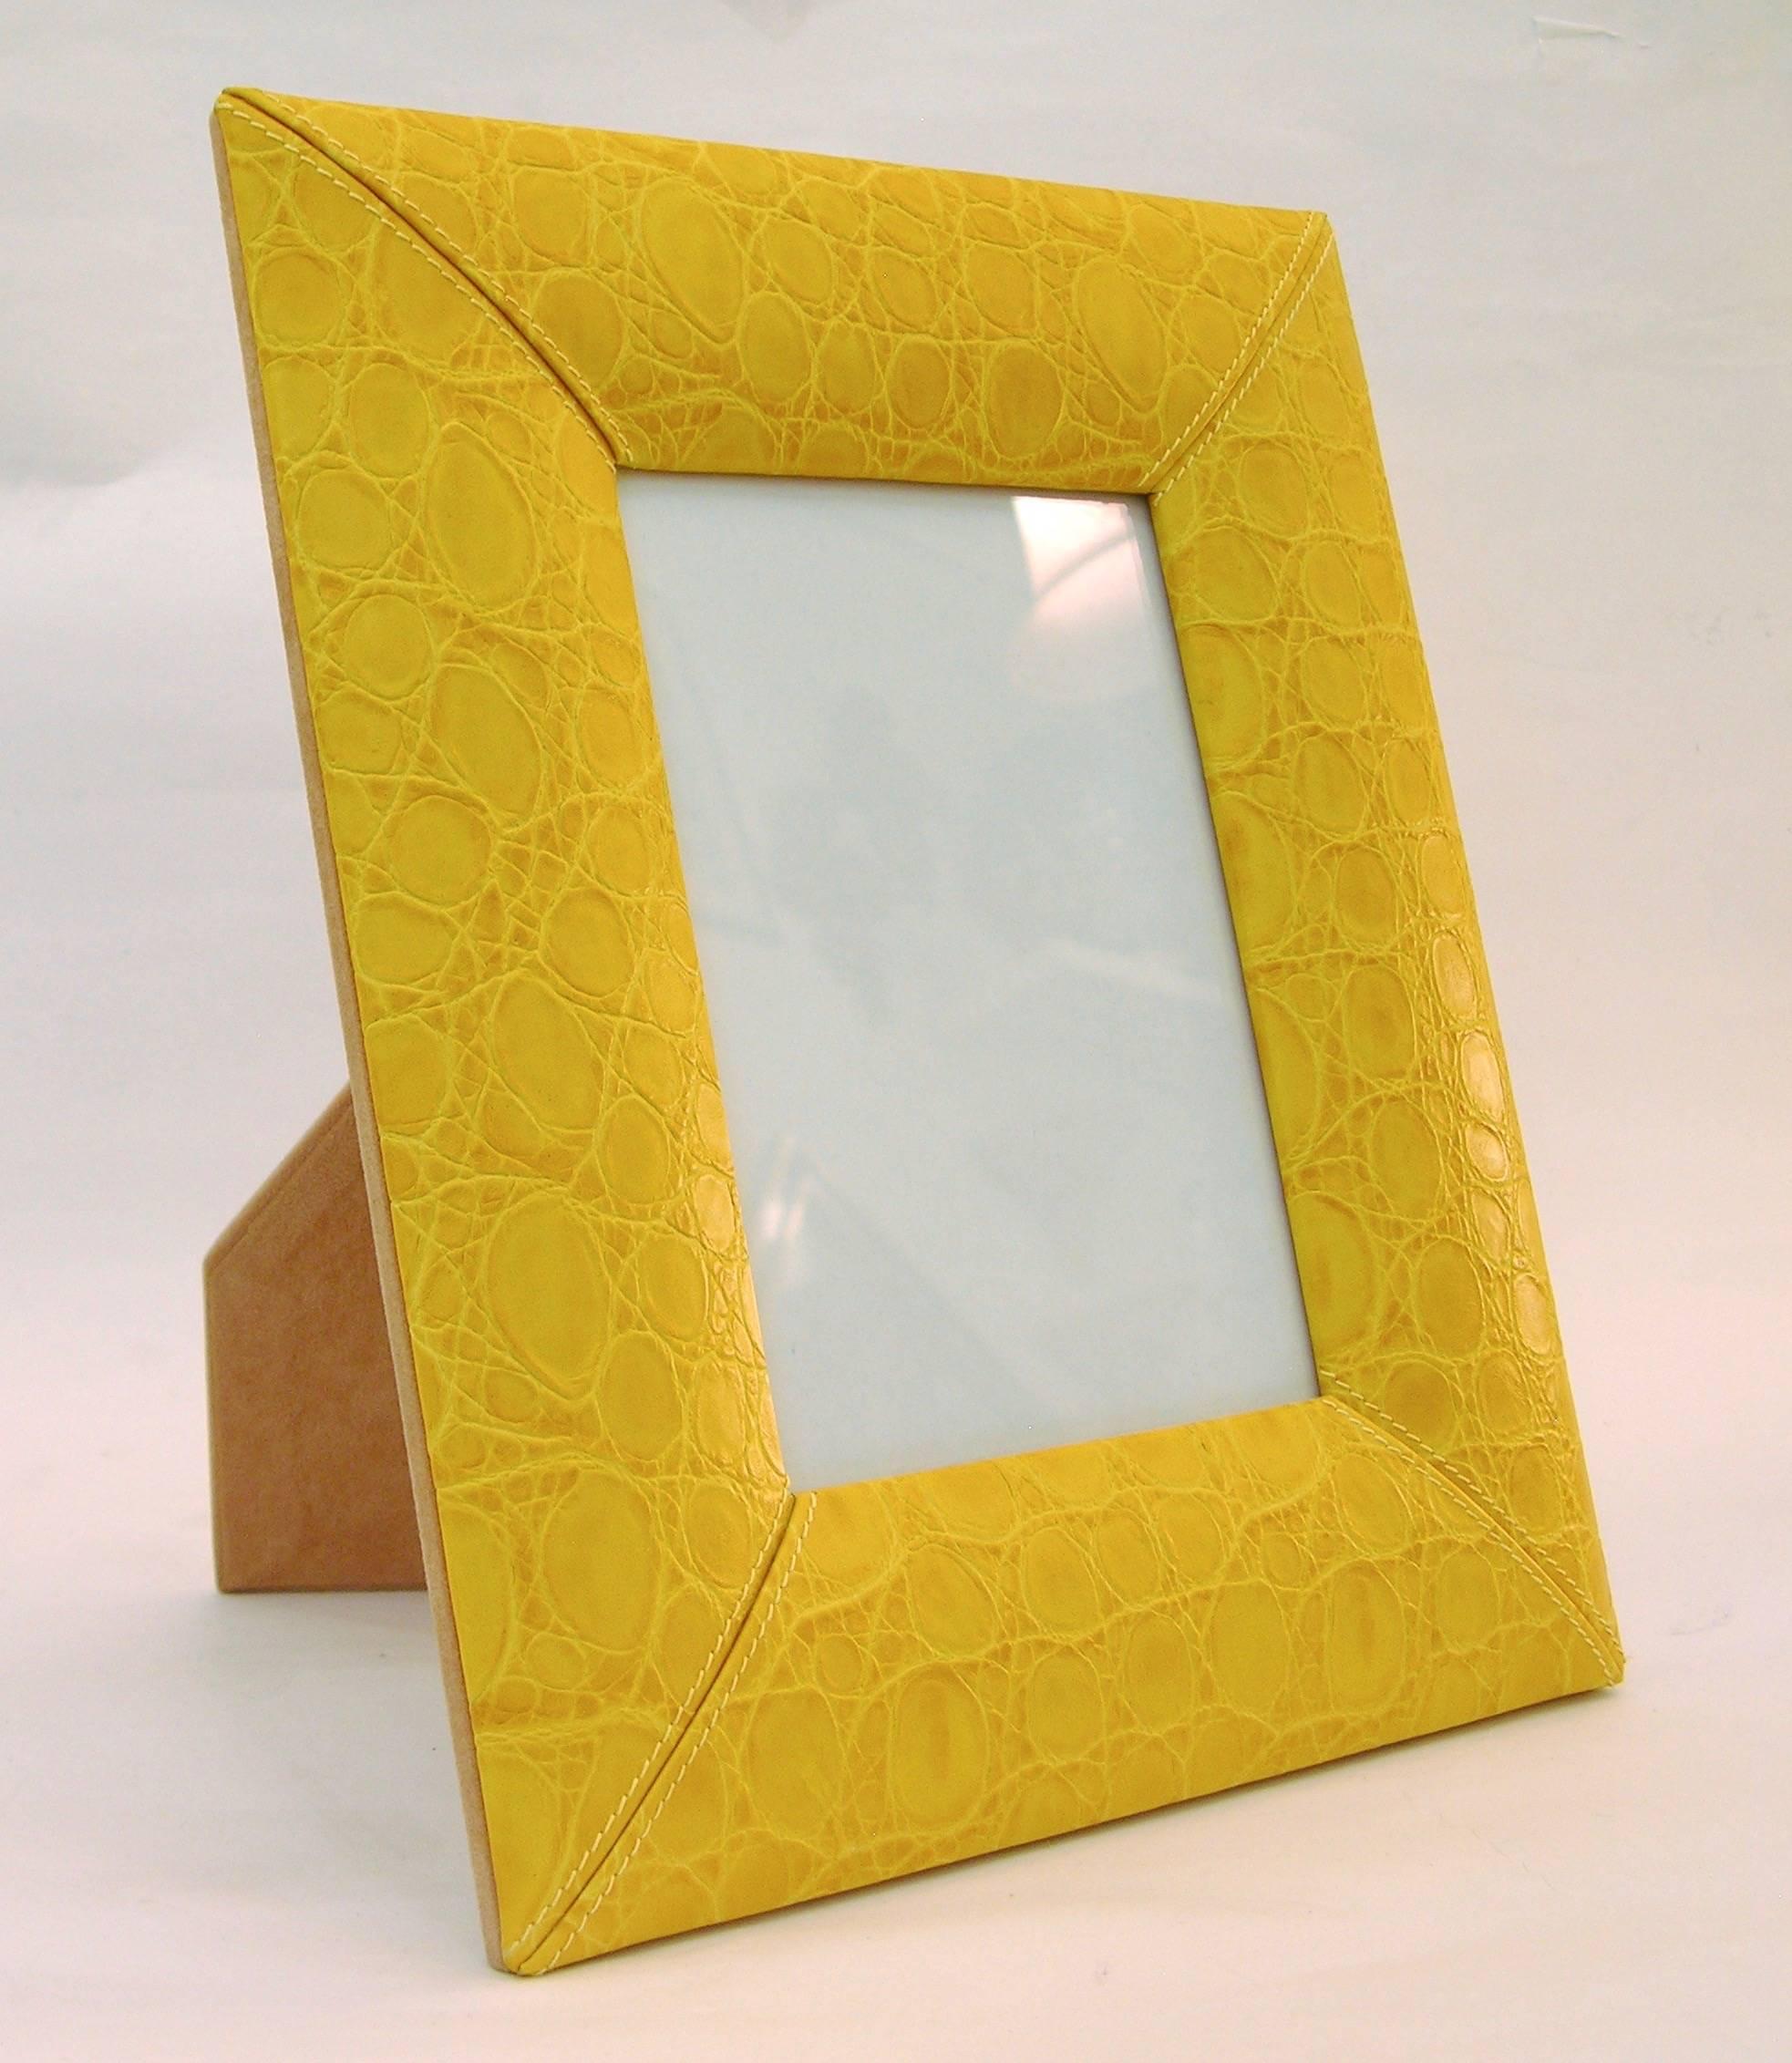 Organic Modern 1990s Paciotti Italian Couture Yellow Embossed Leather Fashion Photo Frame